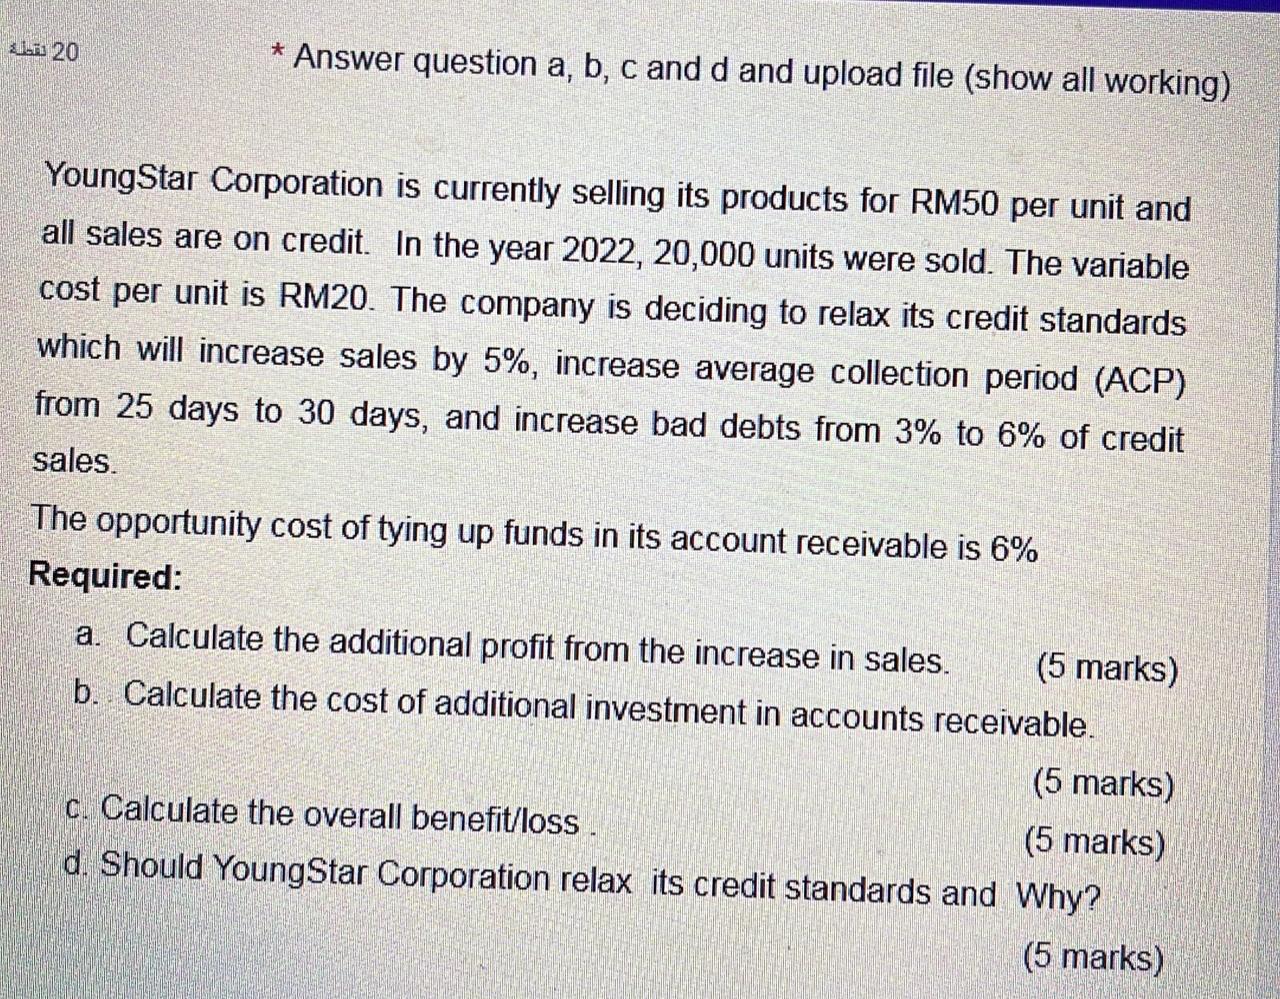 YoungStar Corporation is currently selling its products for RM50 per unit and all sales are on credit. In the year \( 2022,20